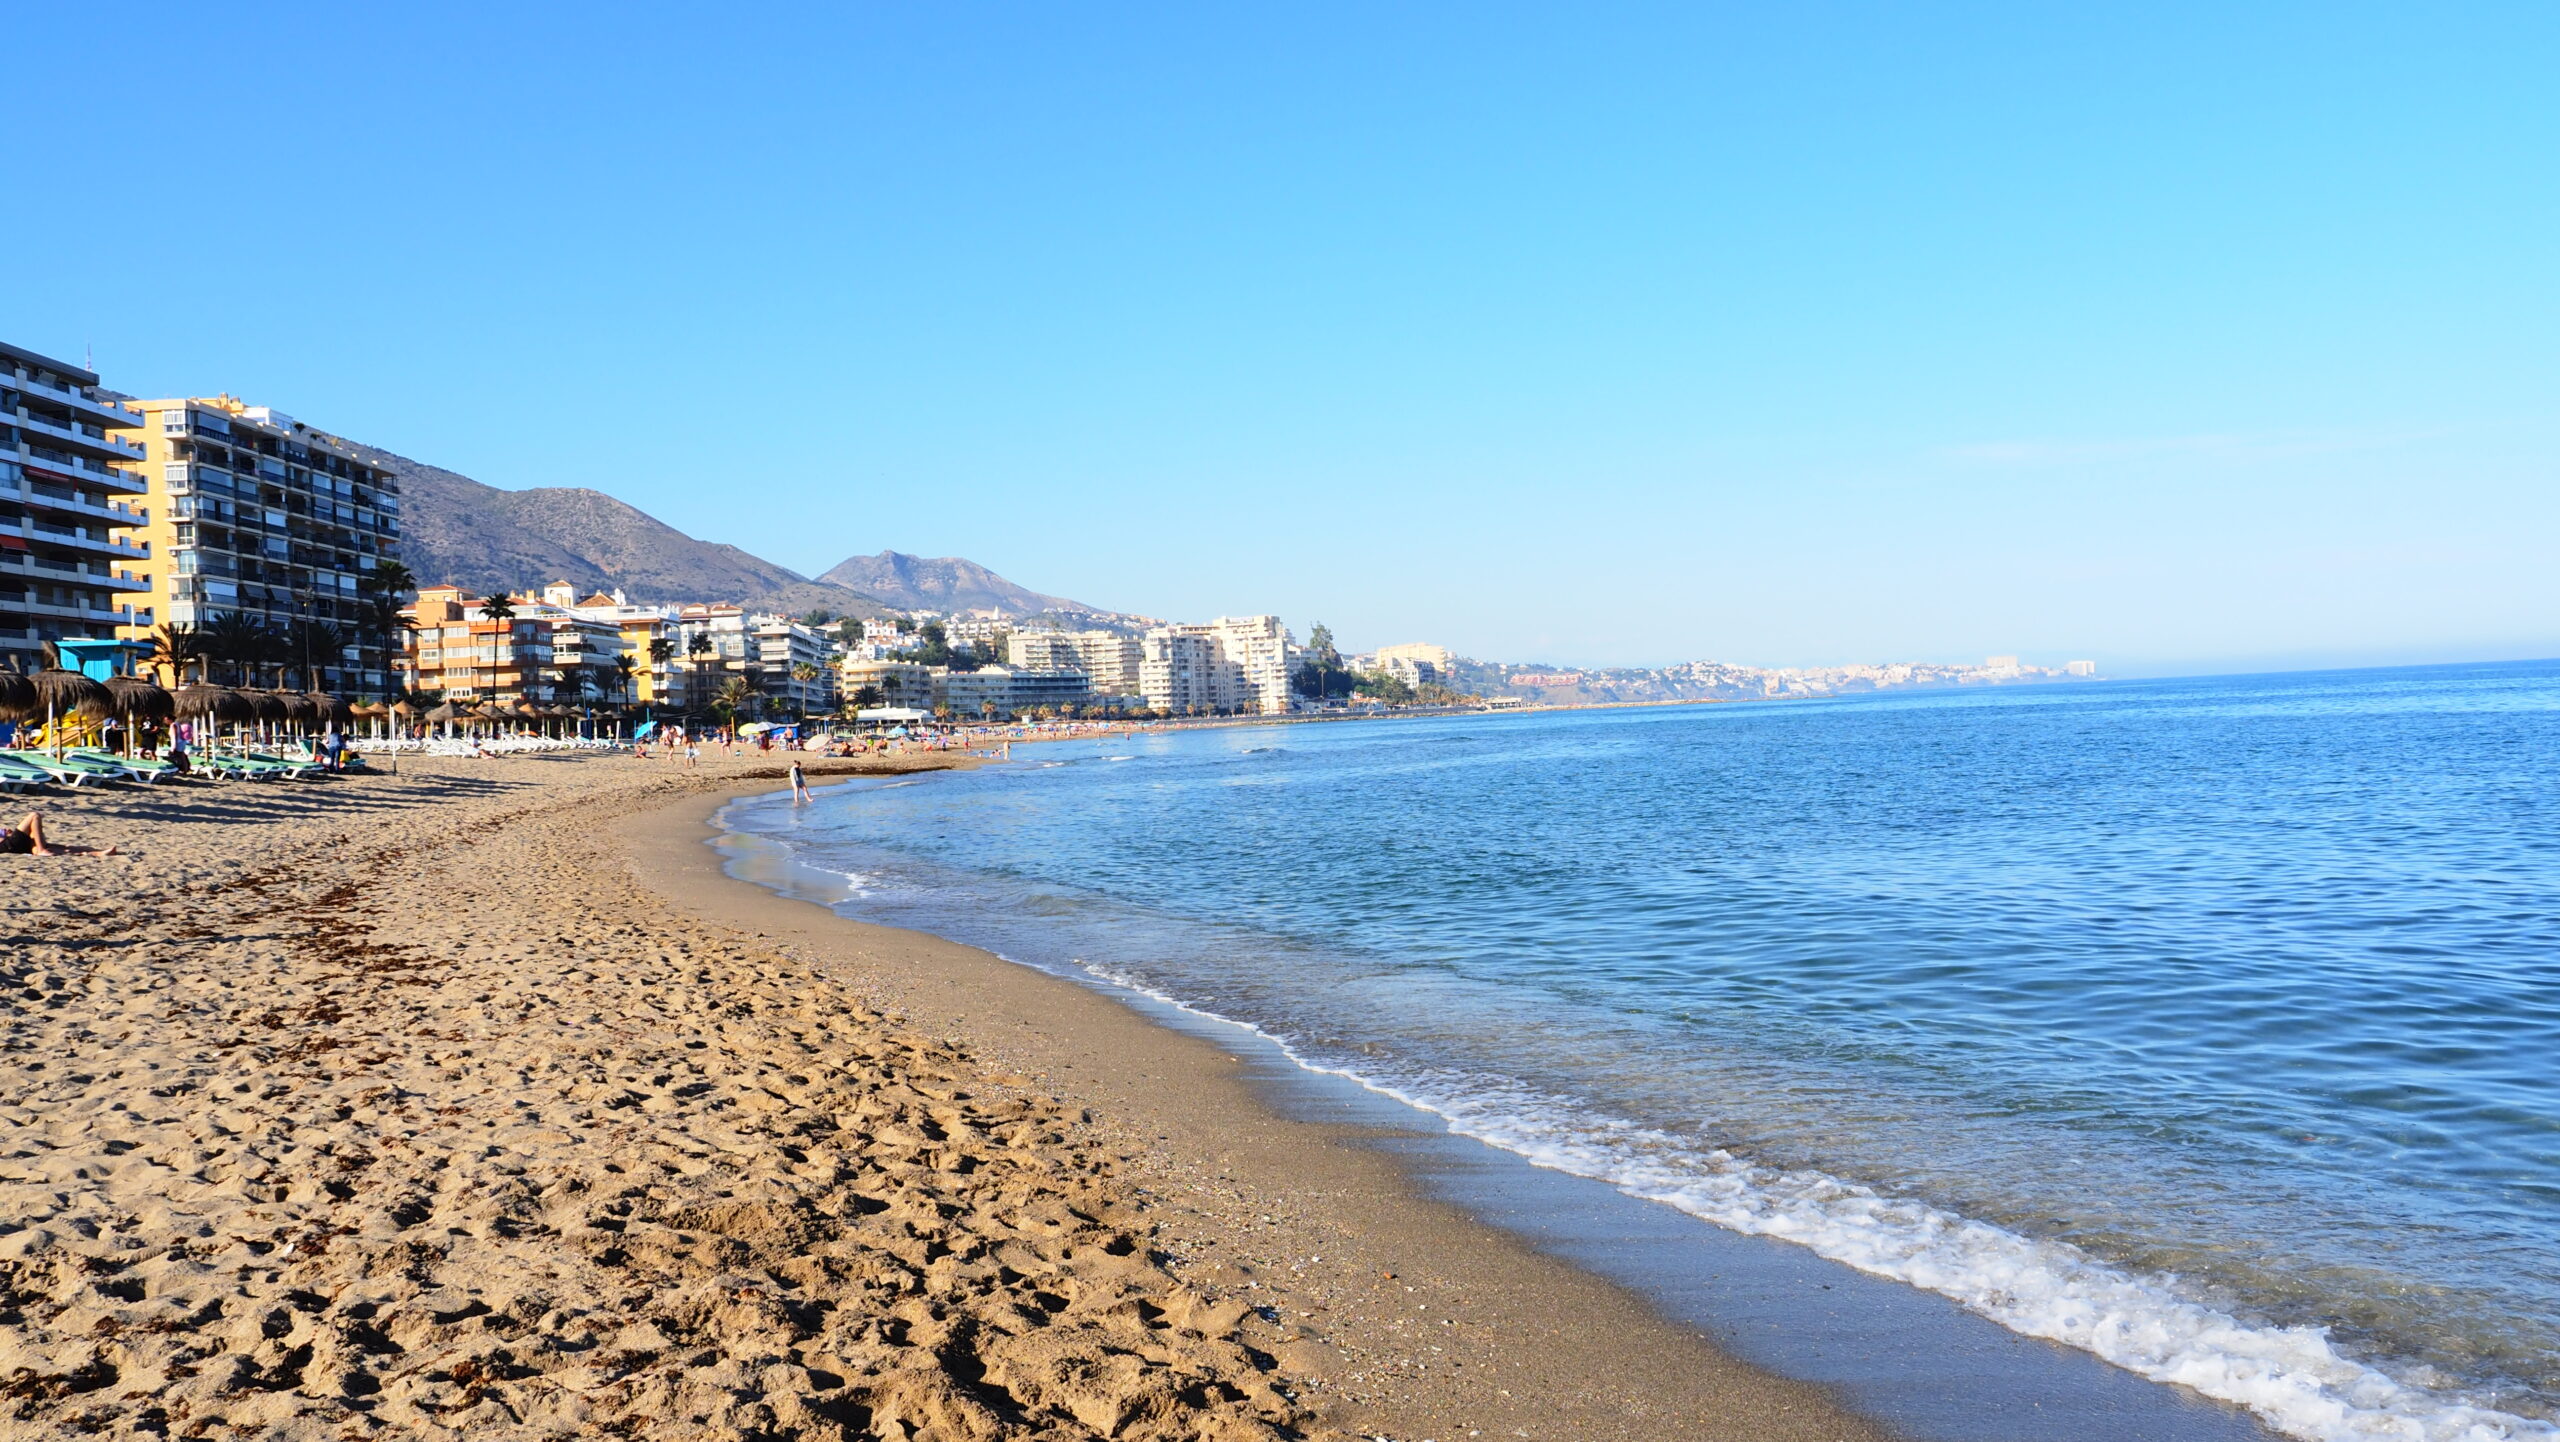 Read more about Los Boliches beautiful playa